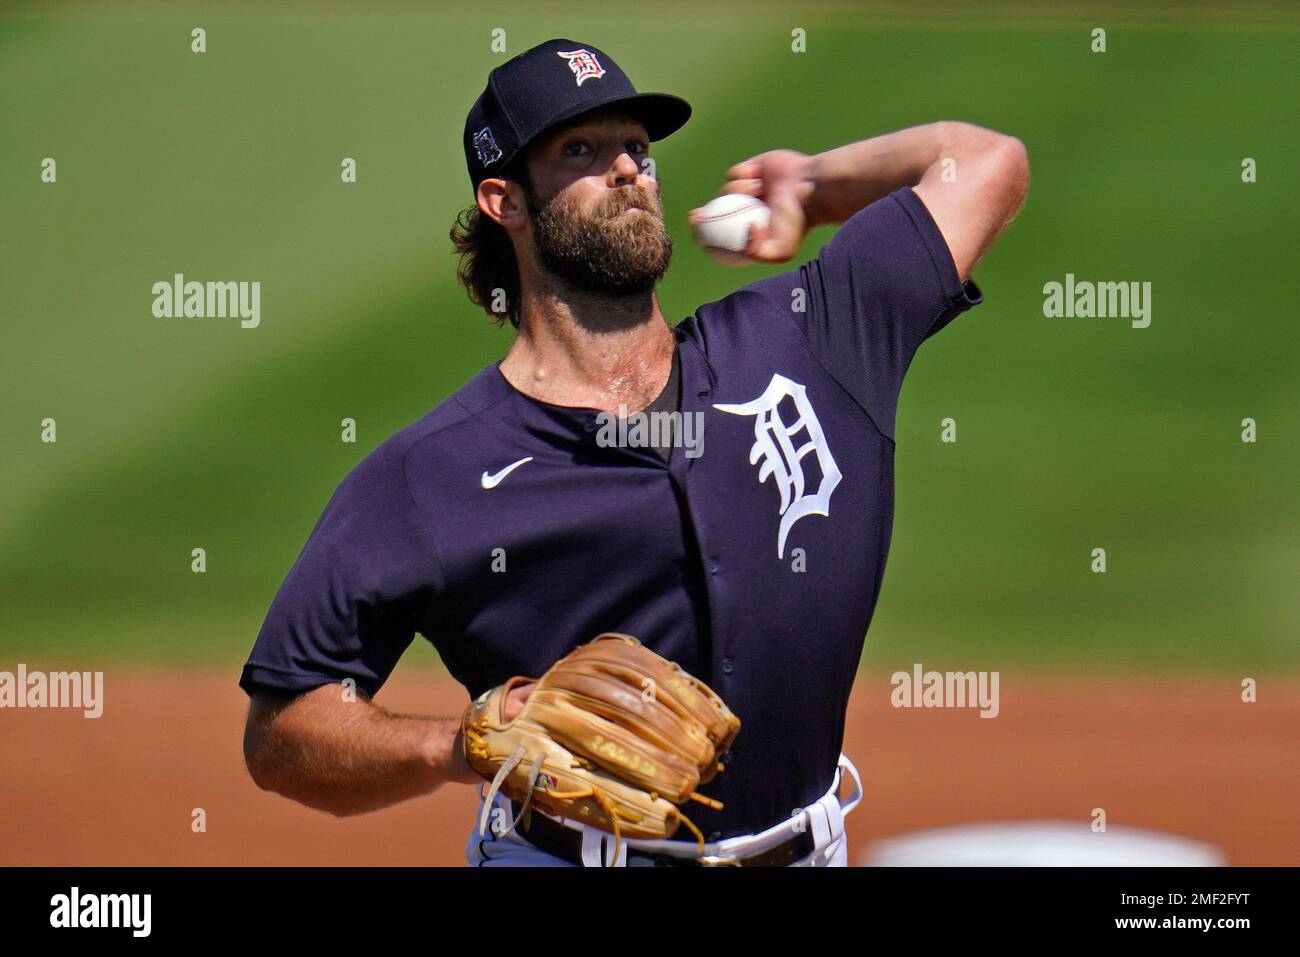 Detroit Tigers starting pitcher Daniel Norris delivers during the